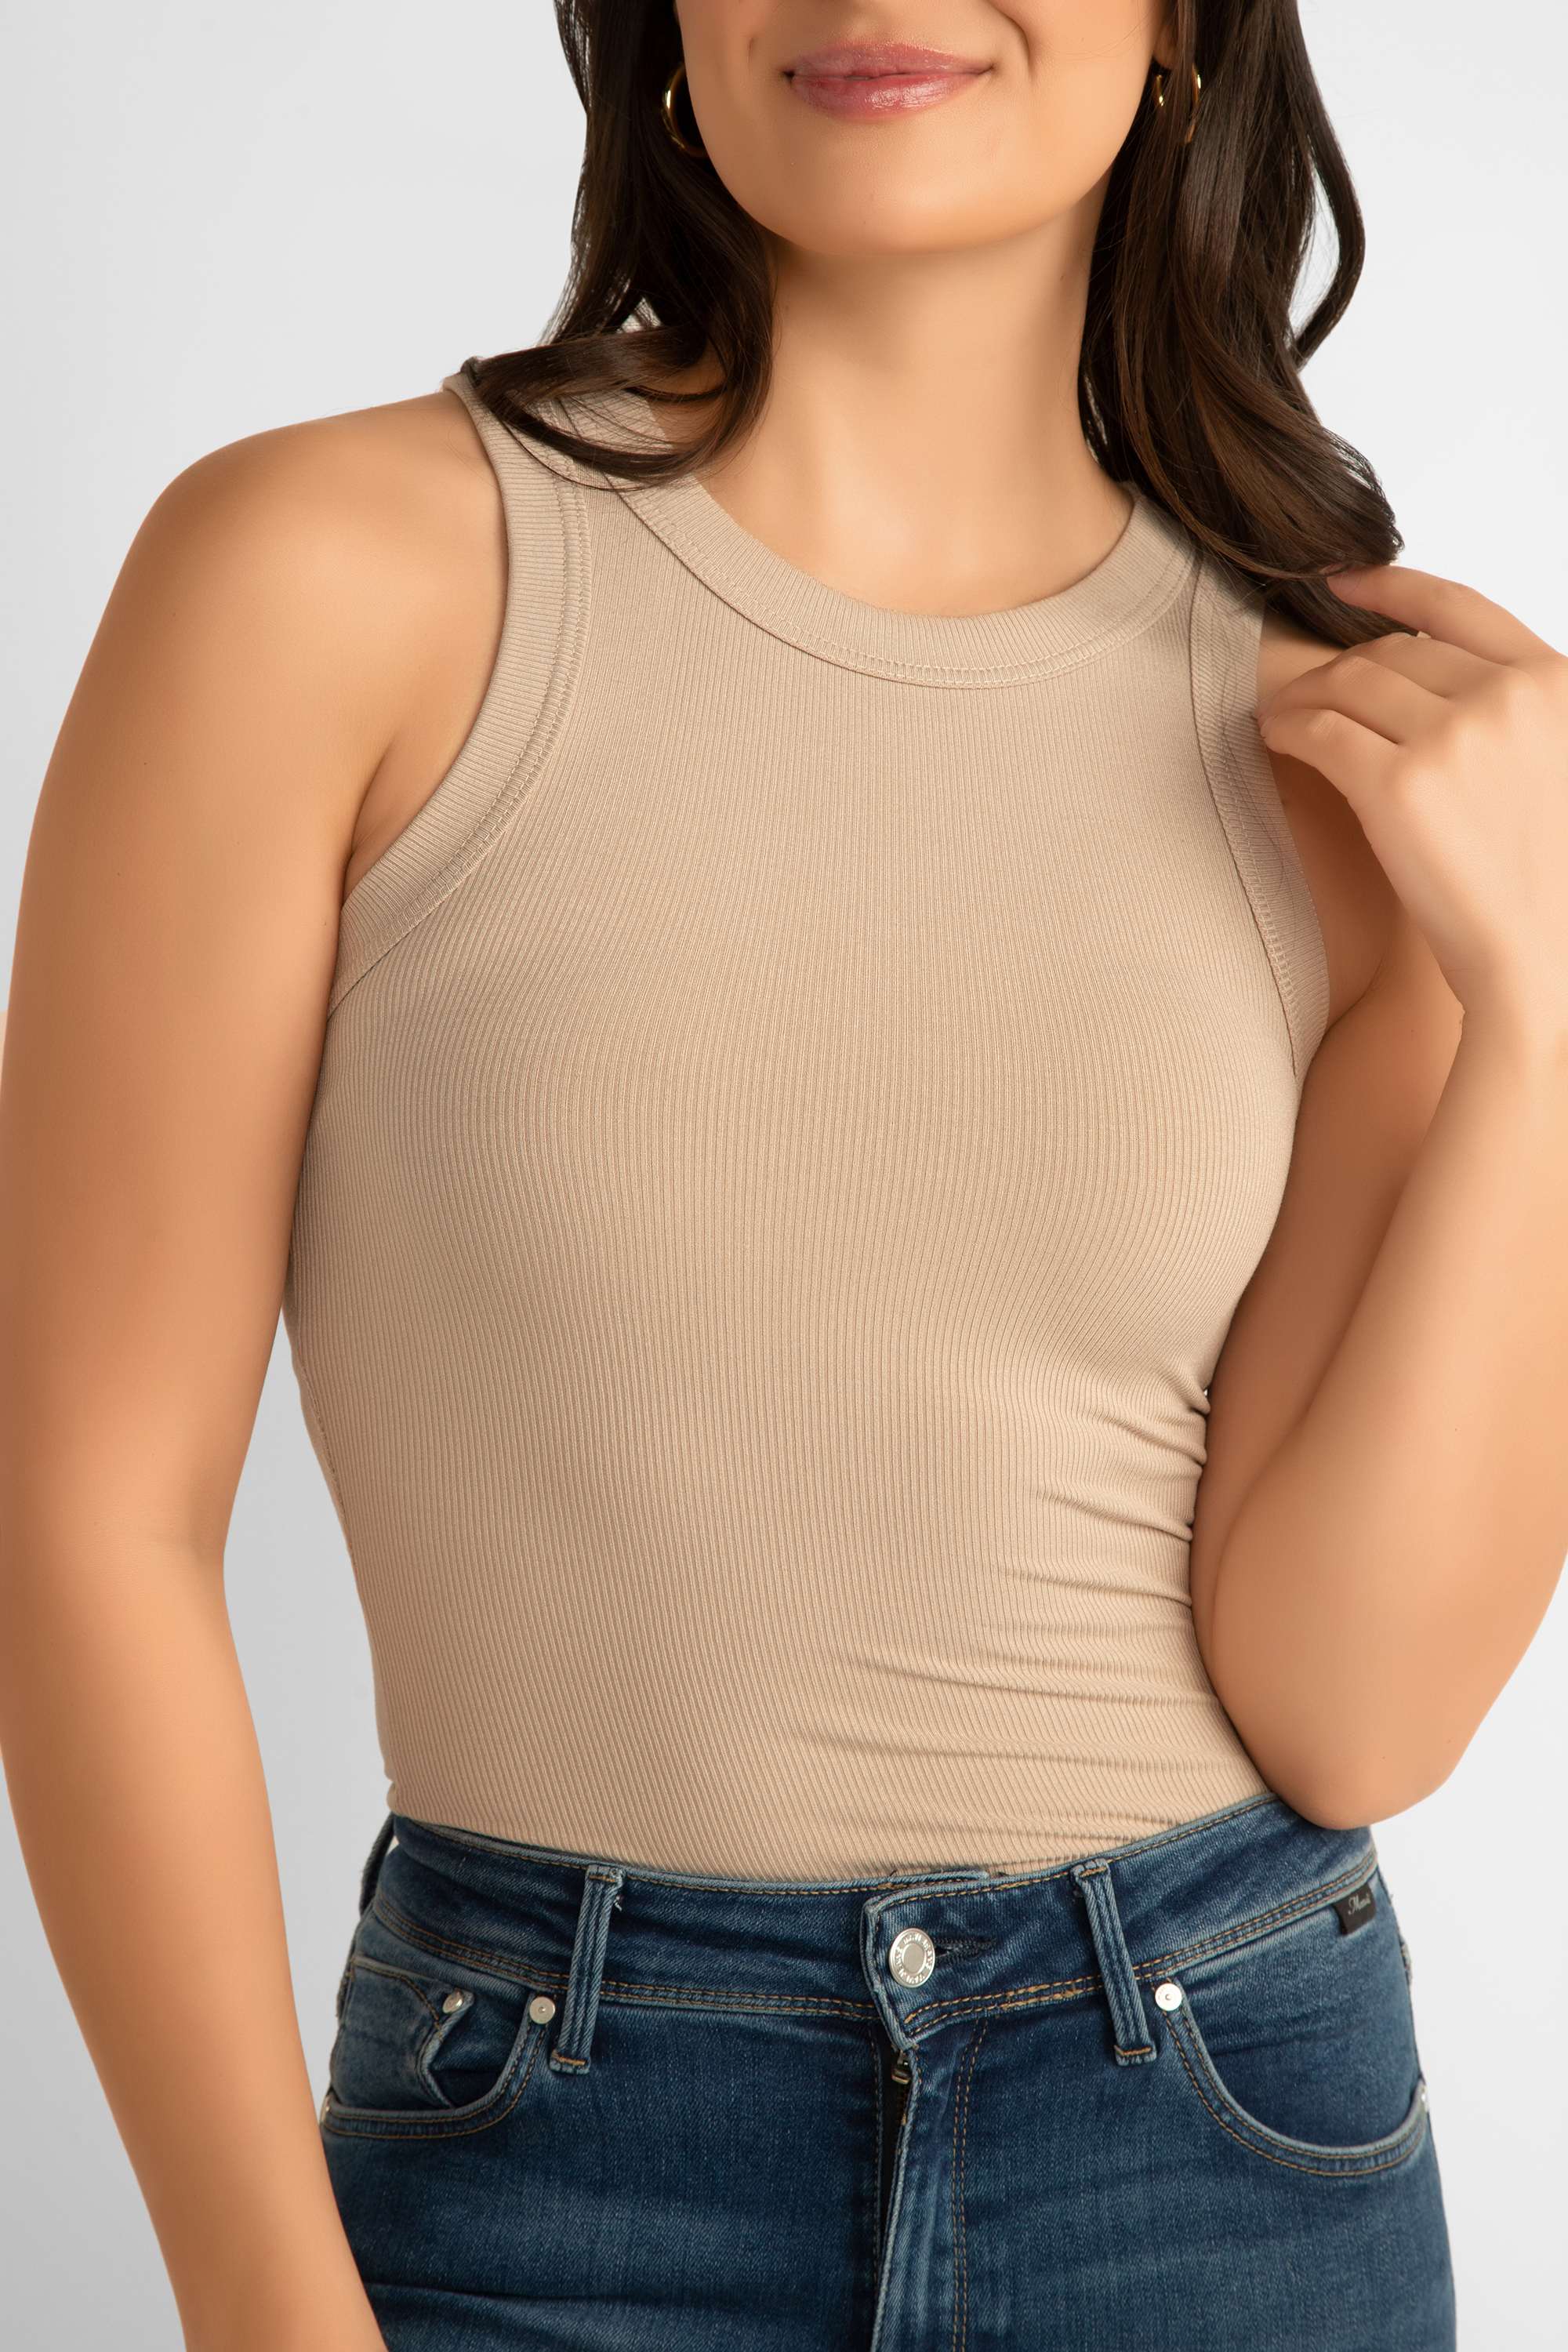 Pink Martini (TO-679542) The Danika Top - Women's Classic Ribbed Knit, Racerback Tank Top in Beige